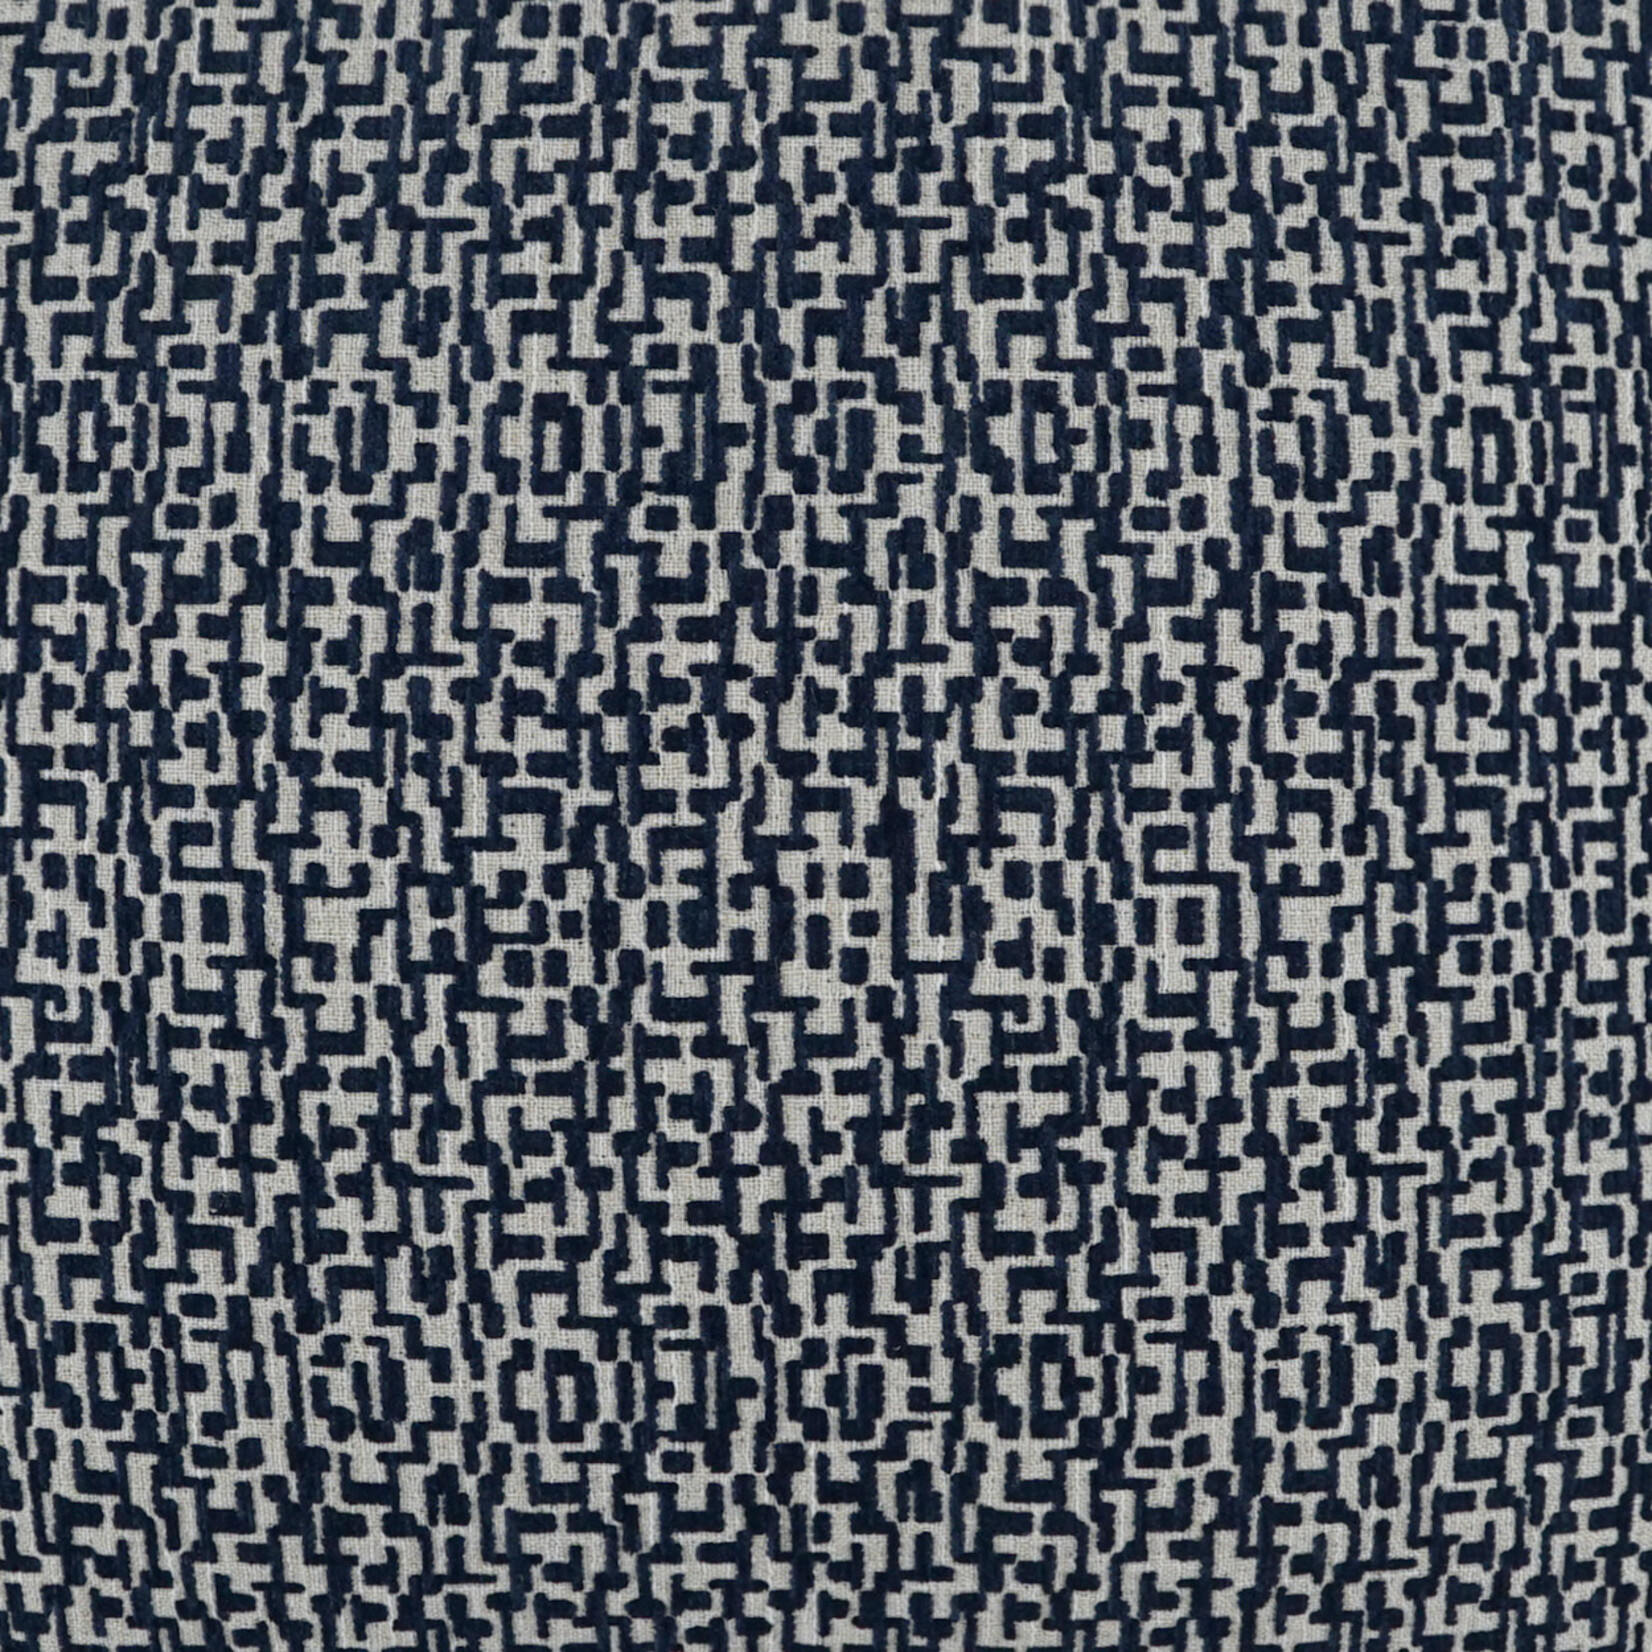 Outside The Box 24x24 Code Square Feather Down Pillow In Navy